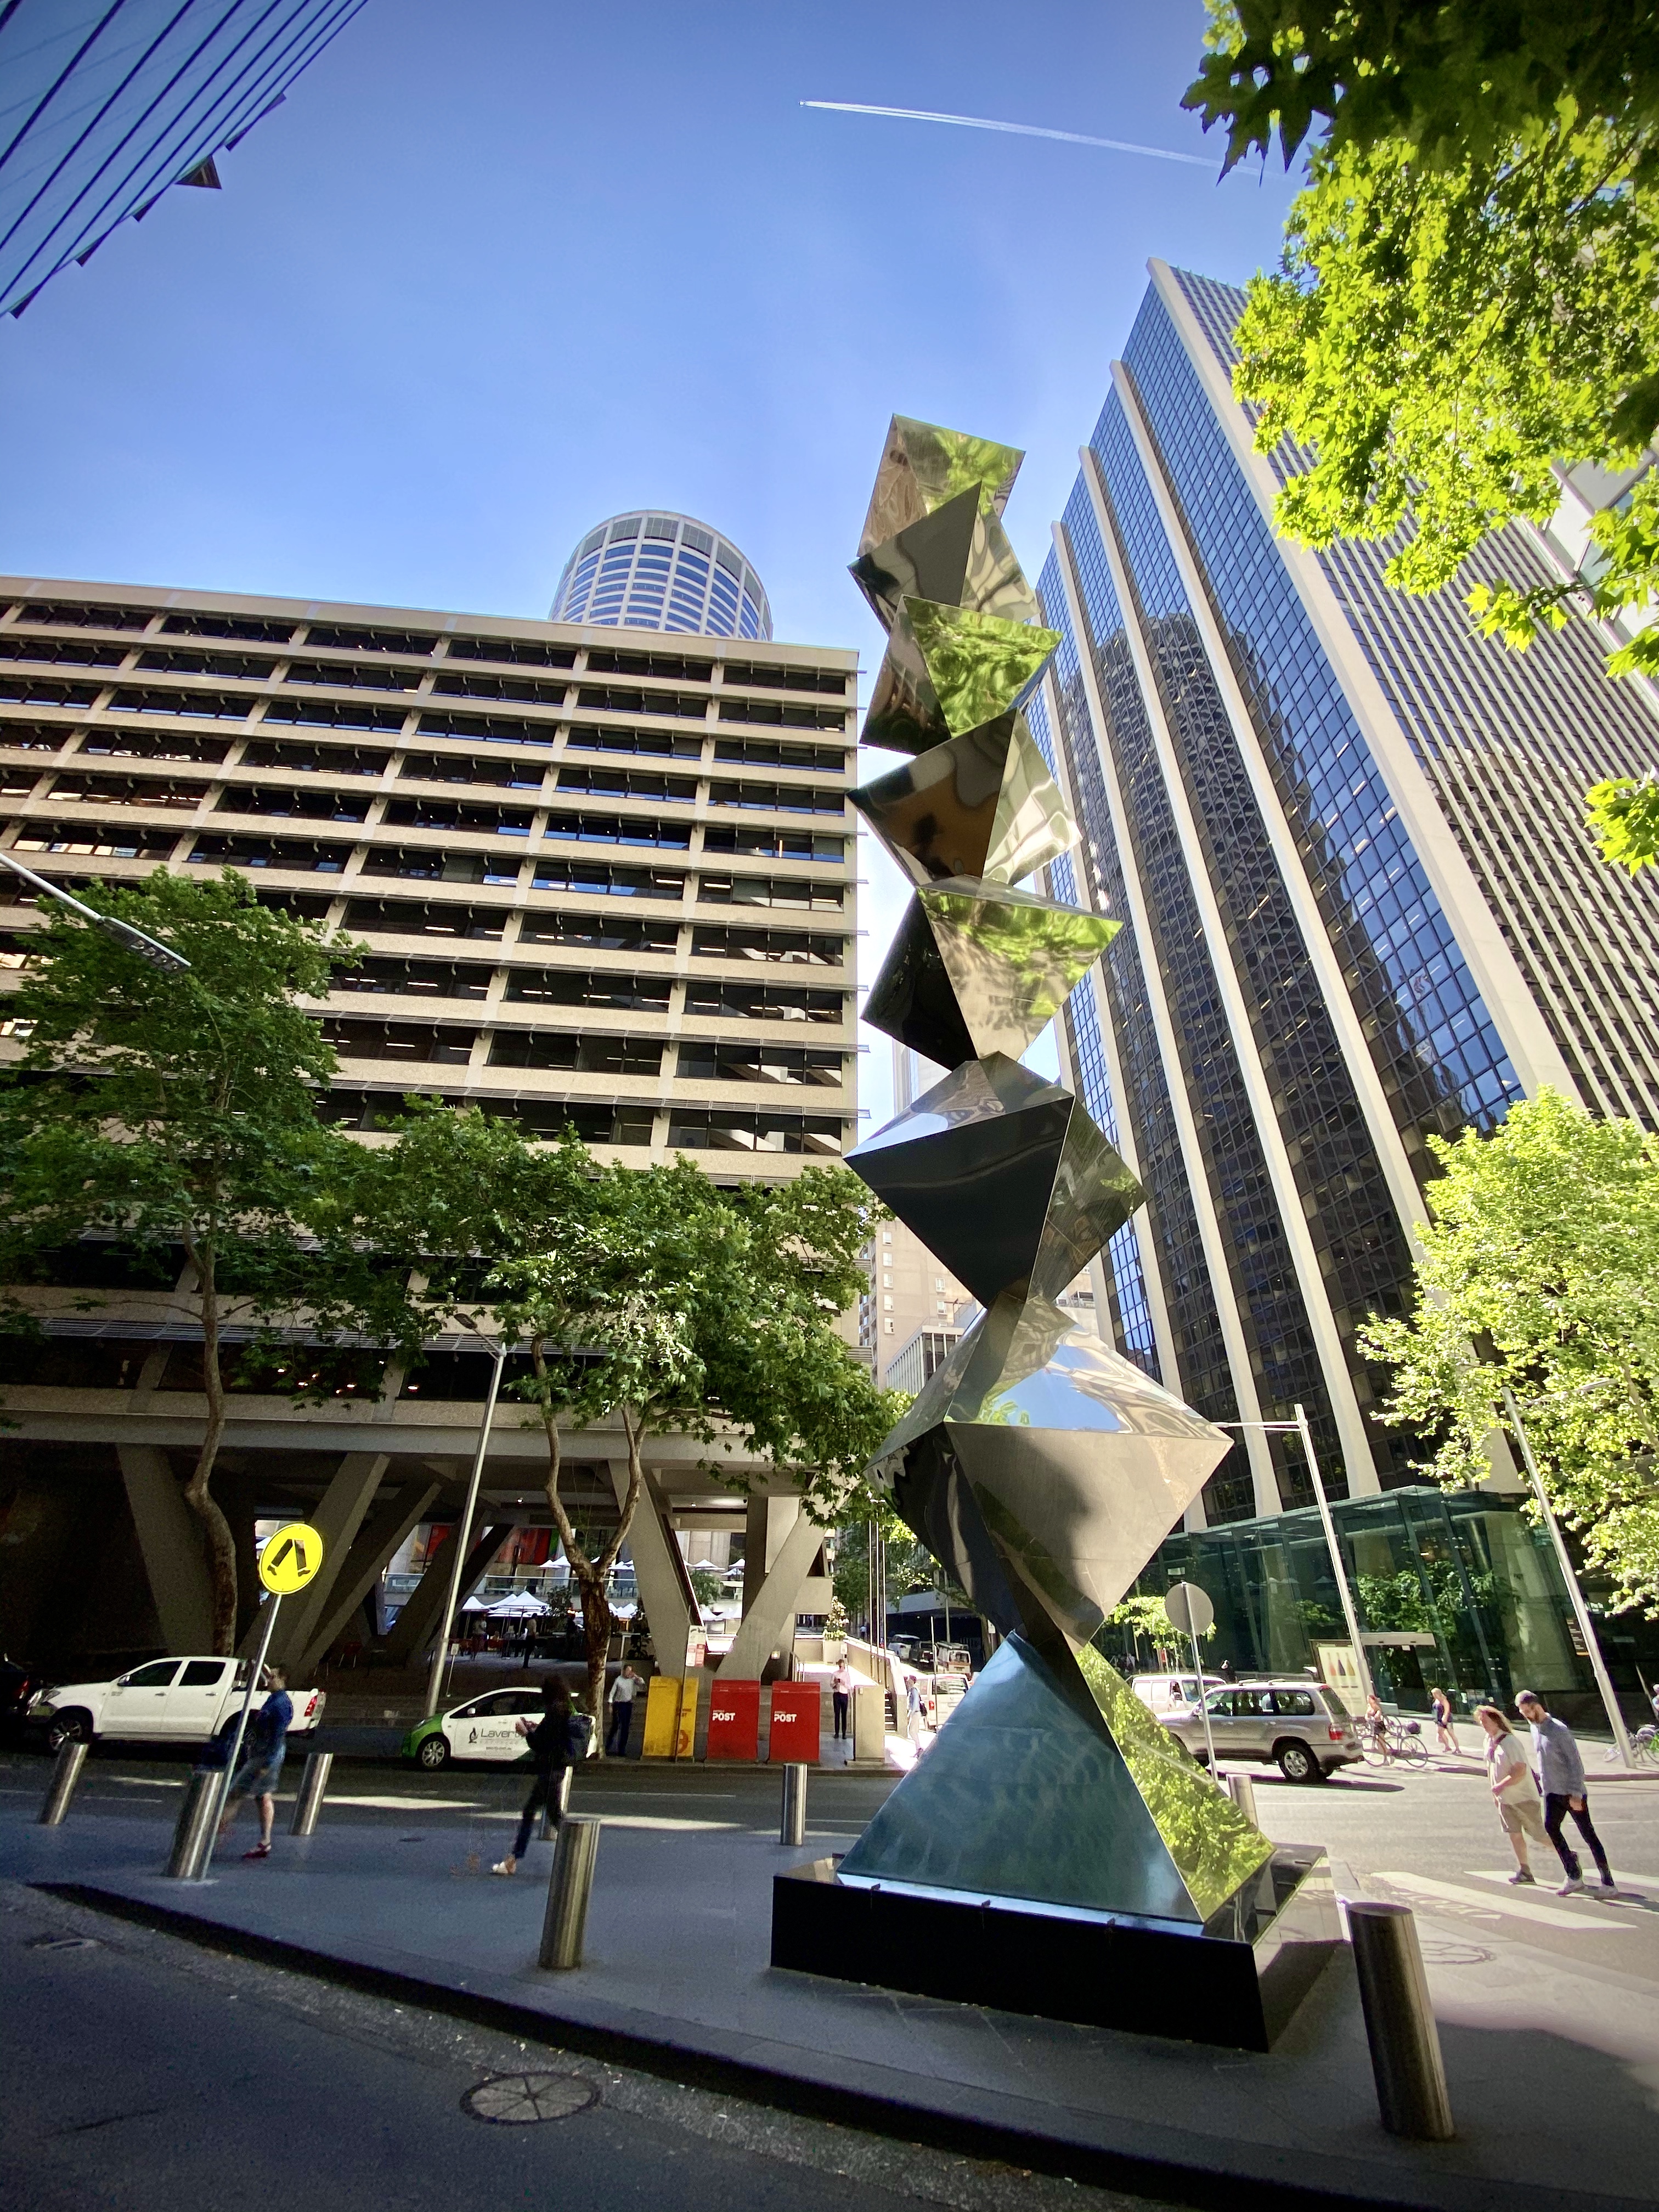 Looking up at the sky with an angular, reflective sculpture in the foreground and buildings in the background